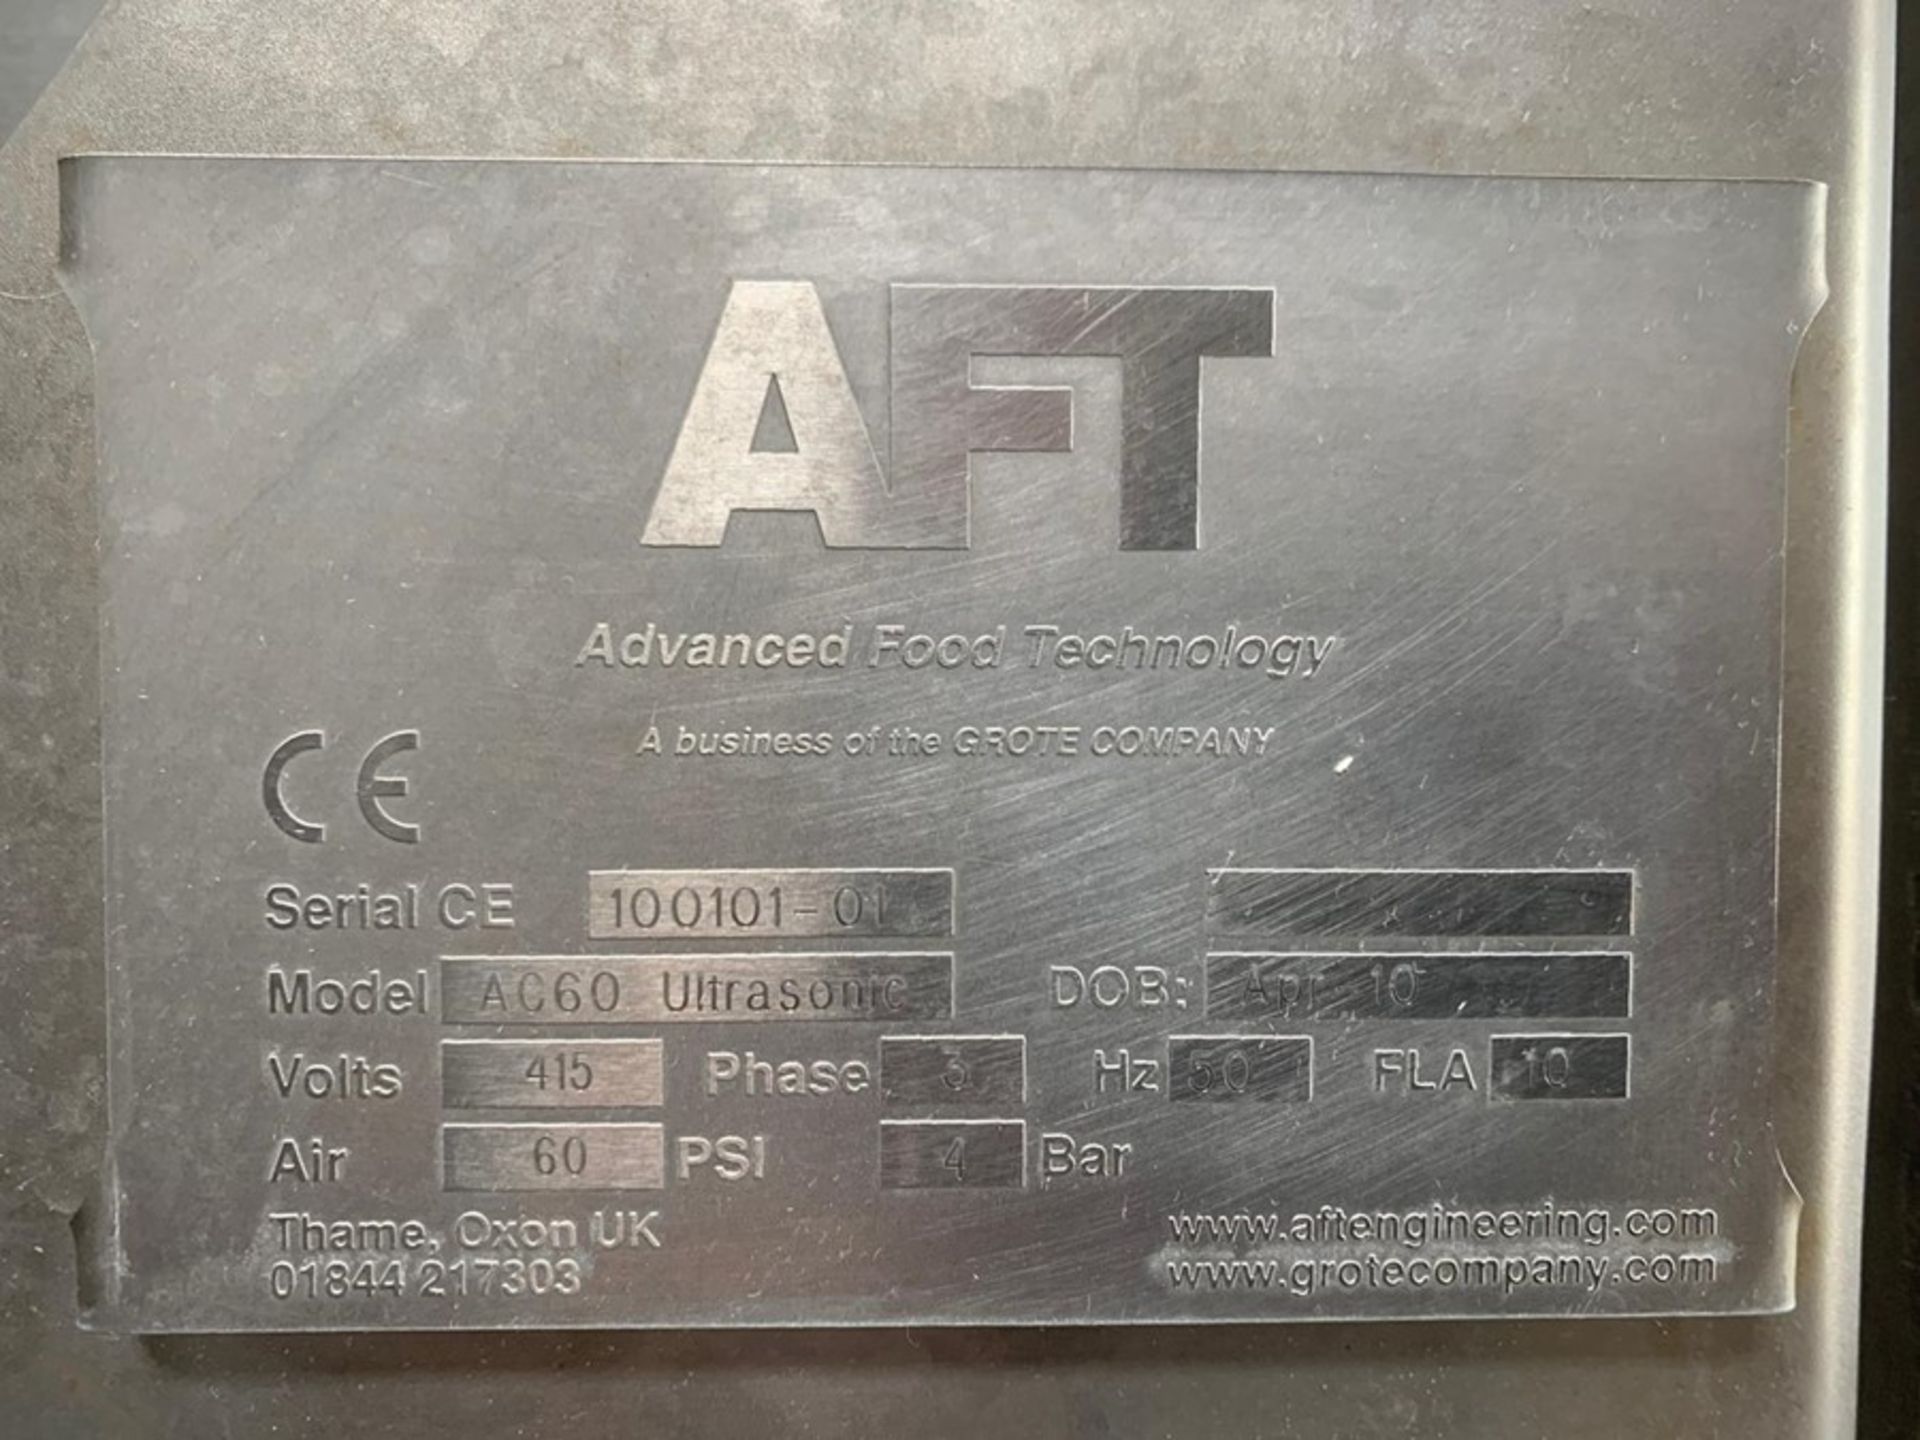 AFT GROTE AC60 ULTRASONIC SANDWICH CUTTER. - Image 6 of 6